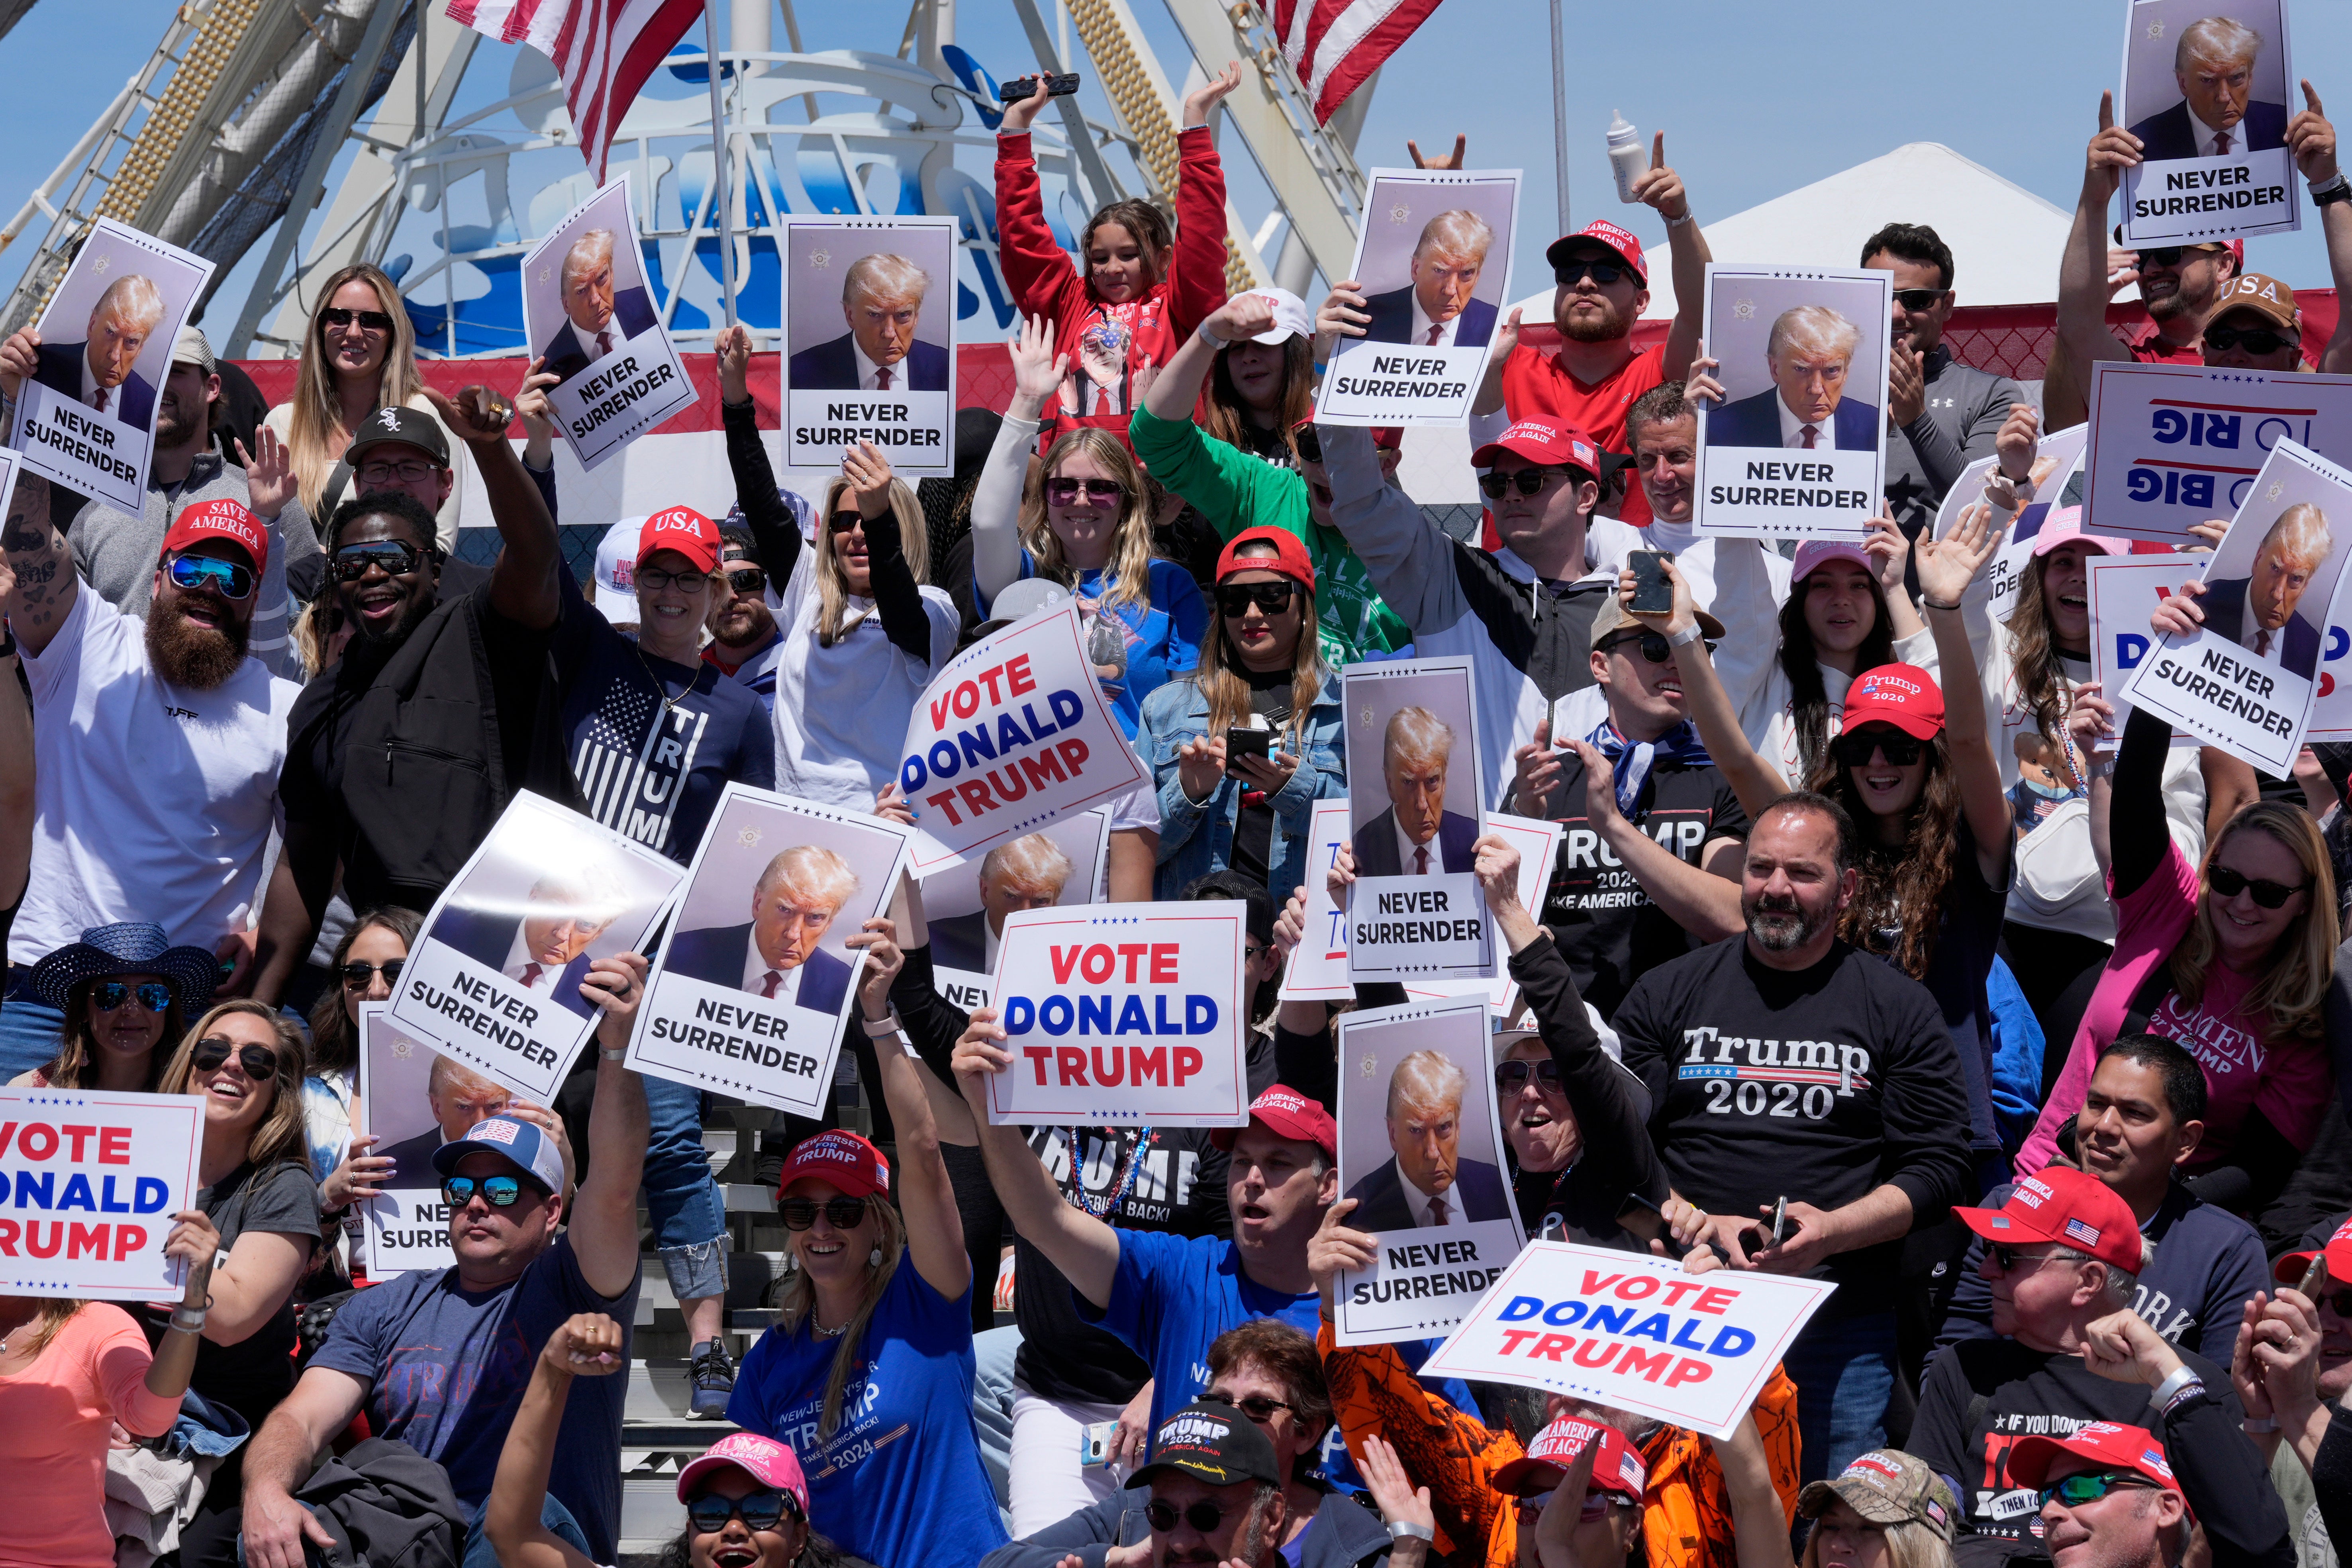 Between 80,000 and 100,000 supporters gathered for the rally in Wildwood, New Jersey, some of whom had camped out overnight to secure a good spot